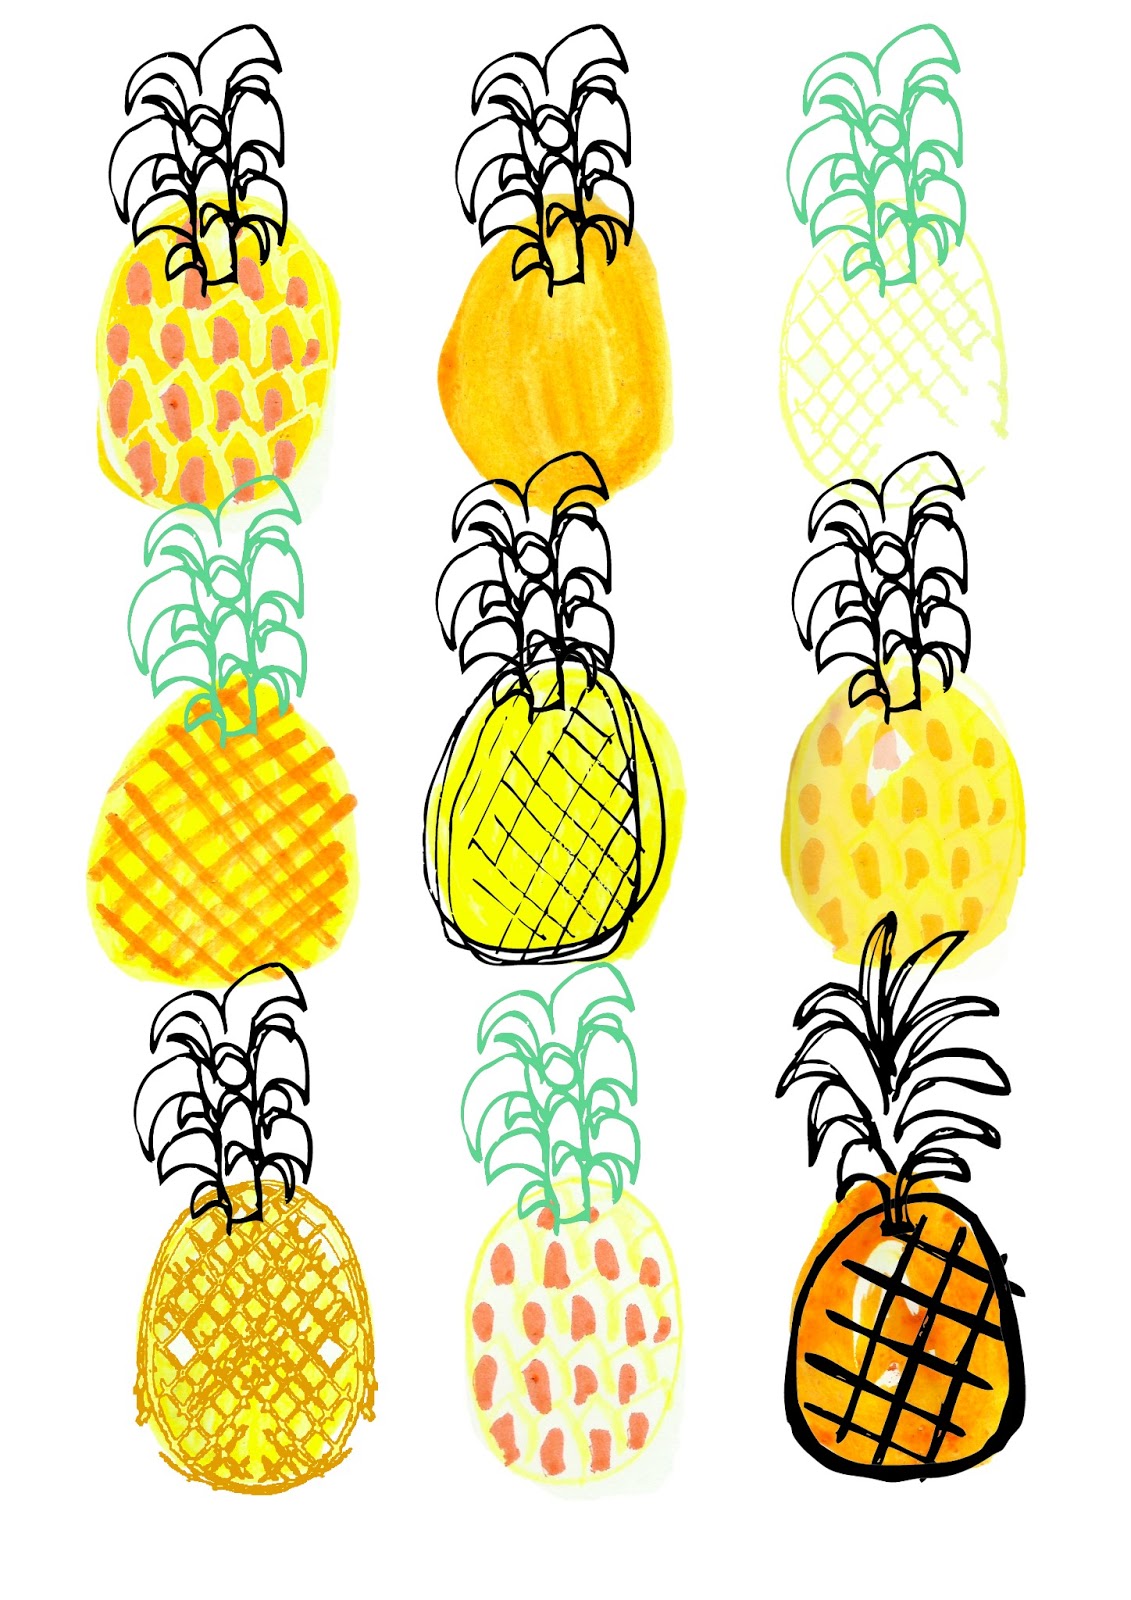 Pineapple Wallpaper Heres one i made earlier